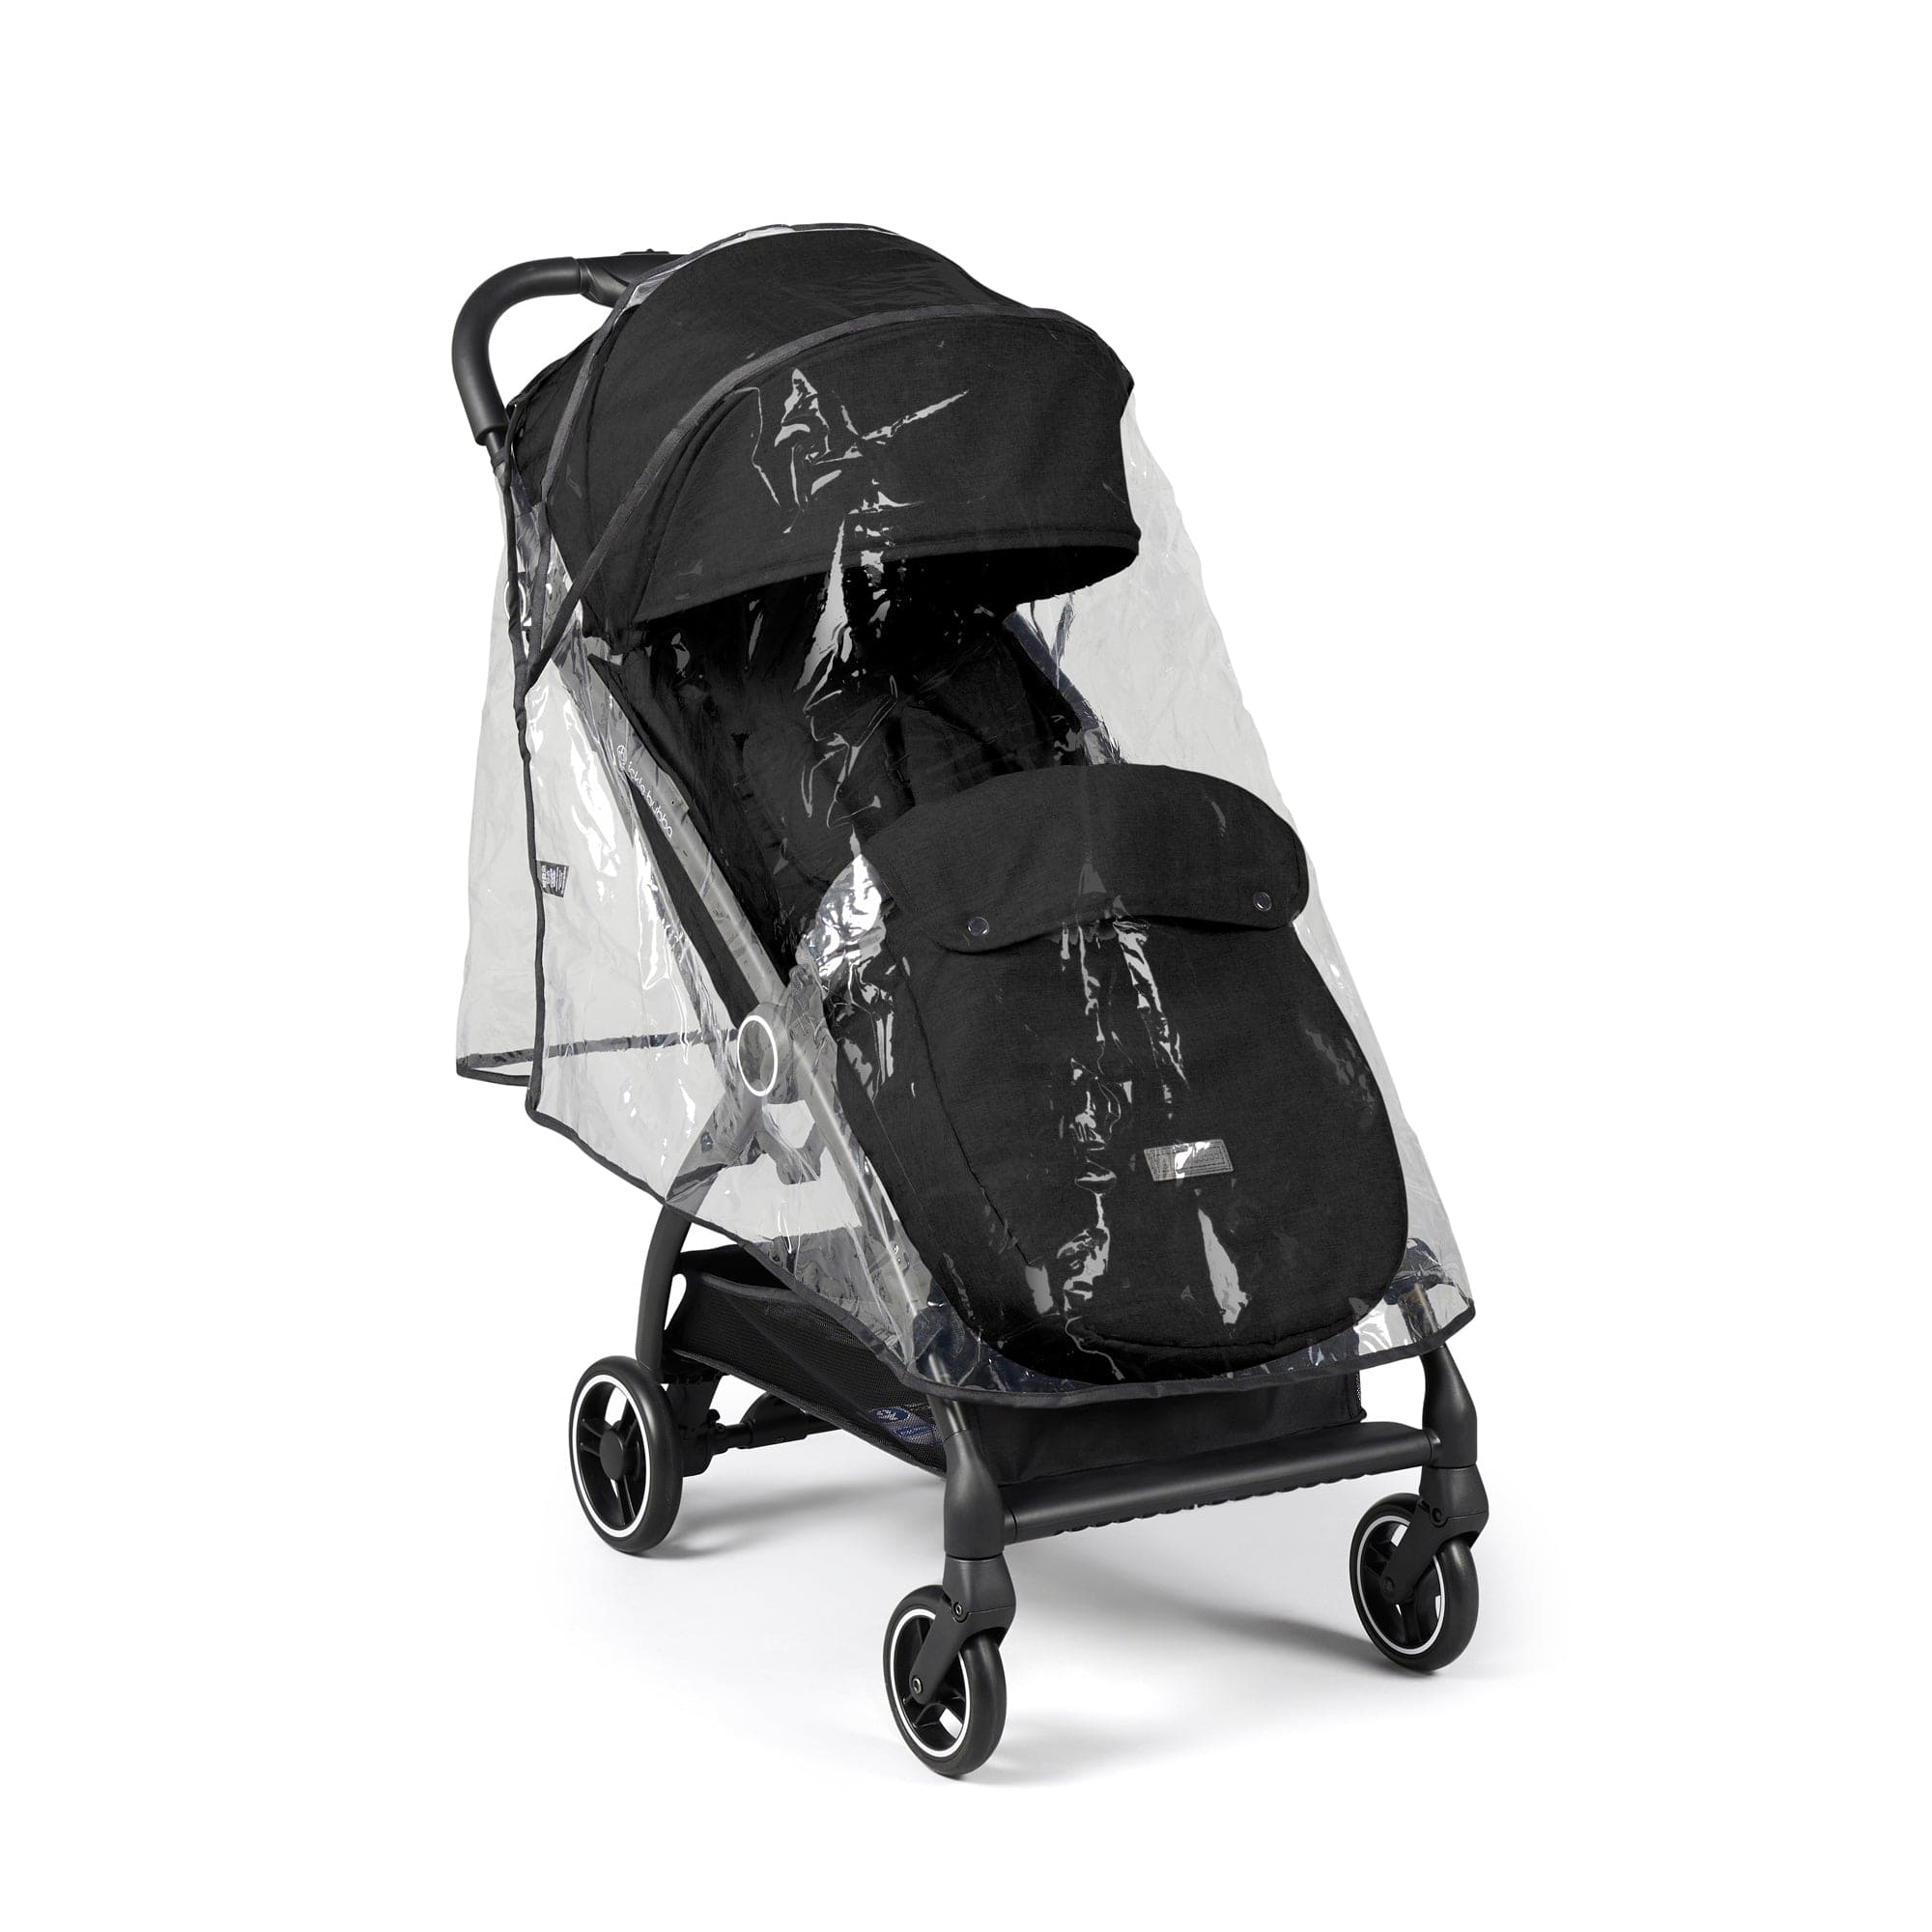 Ickle Bubba baby pushchairs Ickle Bubba Aries Autofold Stroller in Black 15-005-100-001